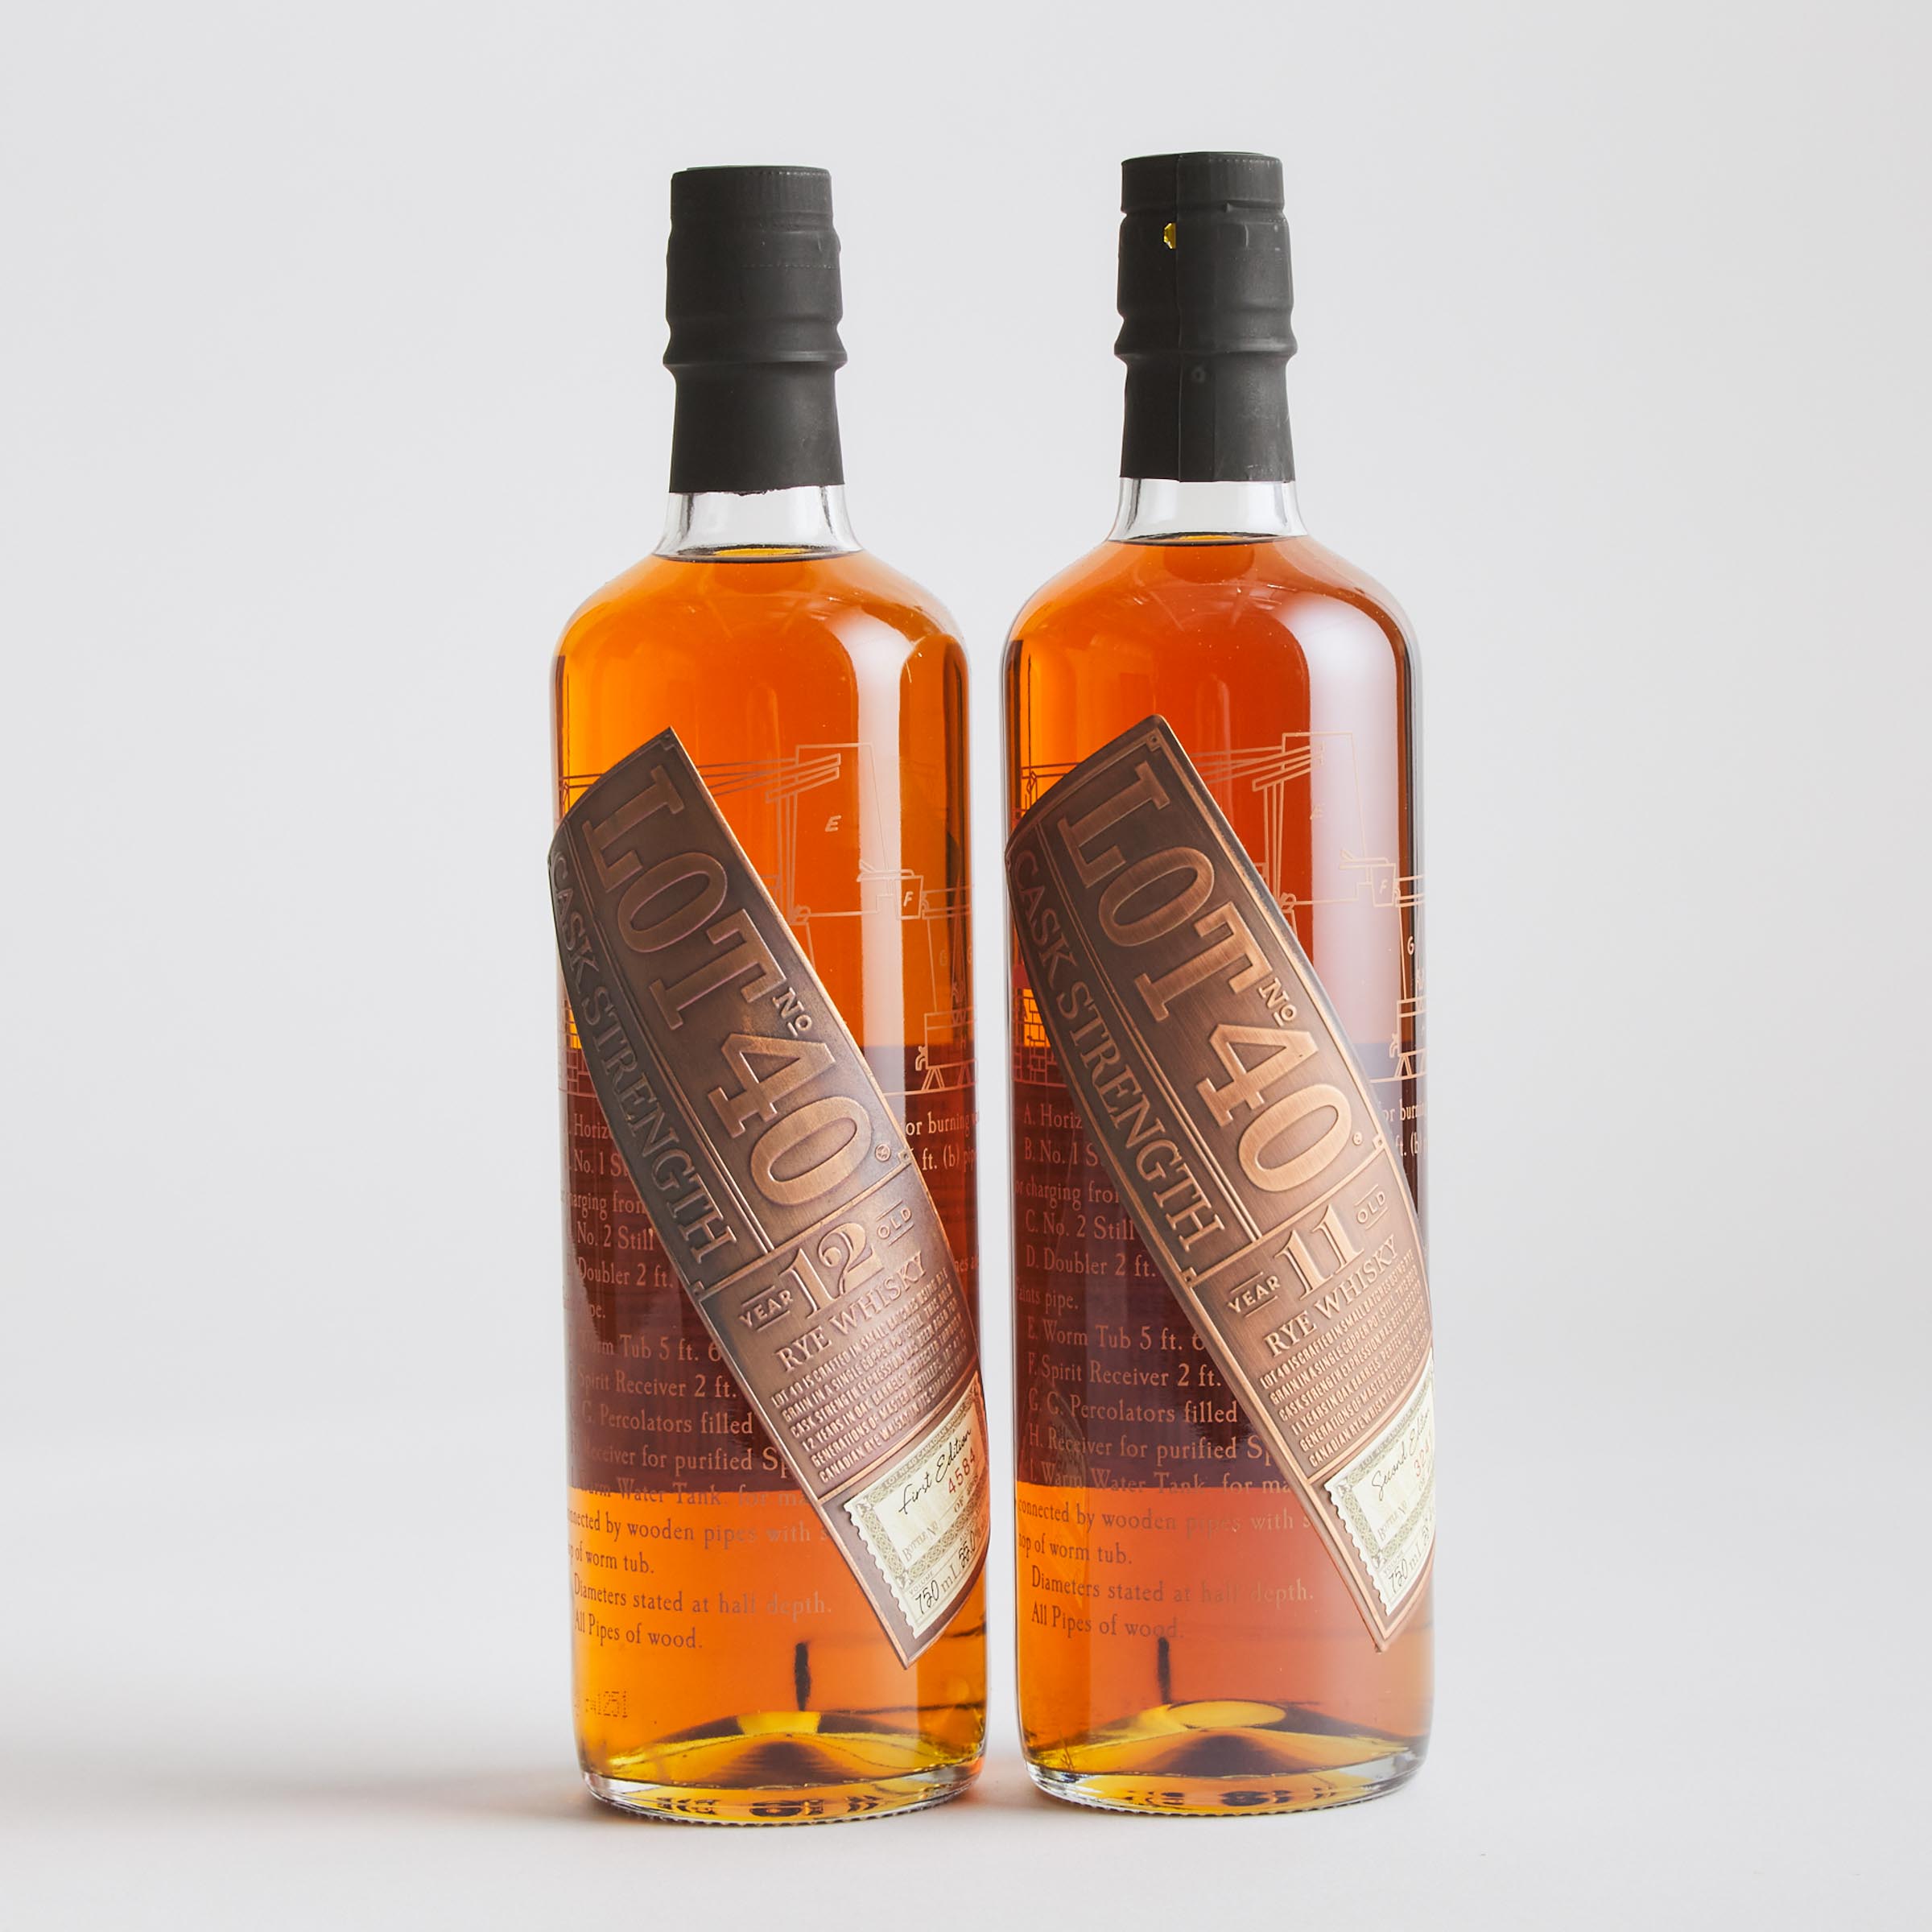 LOT 40 CASK STRENGTH RYE WHISKY 11 YEARS (ONE 750 ML)
LOT 40 CASK STRENGTH RYE WHISKY 12 YEARS (ONE 750 ML)